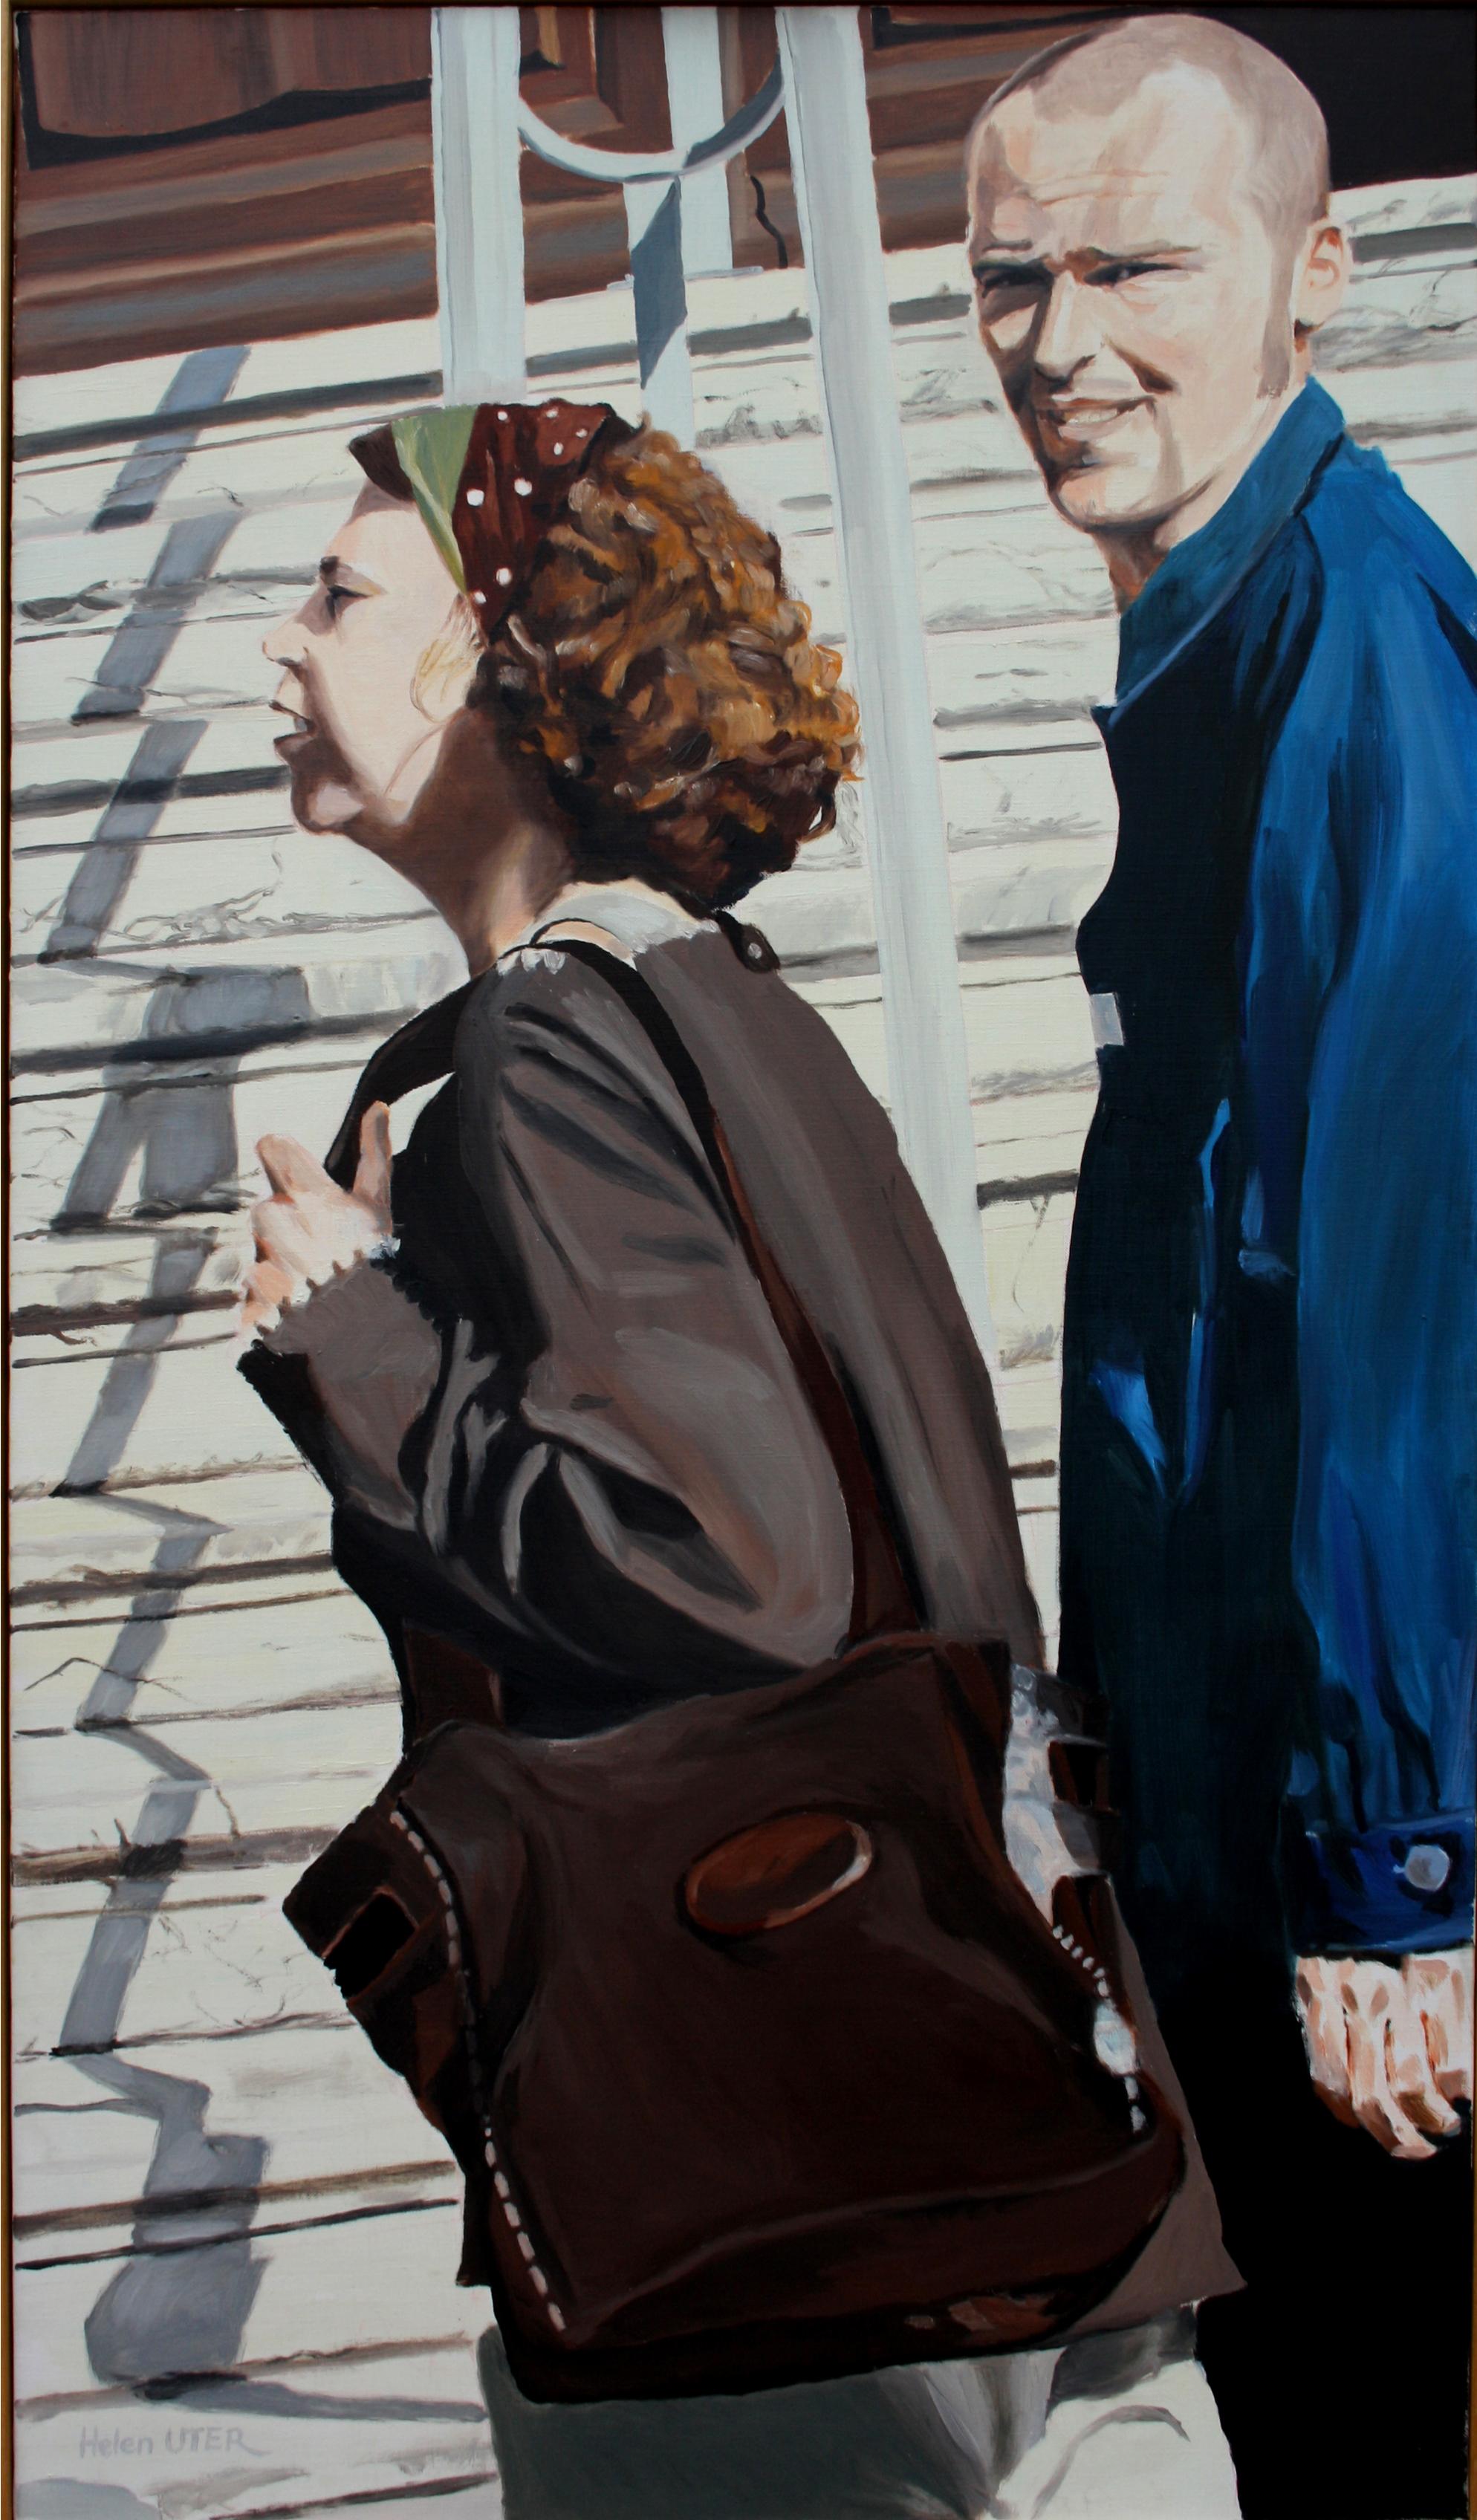 Oil on canvas, 

Helen Uter is an established Franco-American painter born in 1955 who lives and works in Donnery, near Orléans, France. Heavily influenced by Edward Hopper, she creates works that explore everyday life in our current, highly